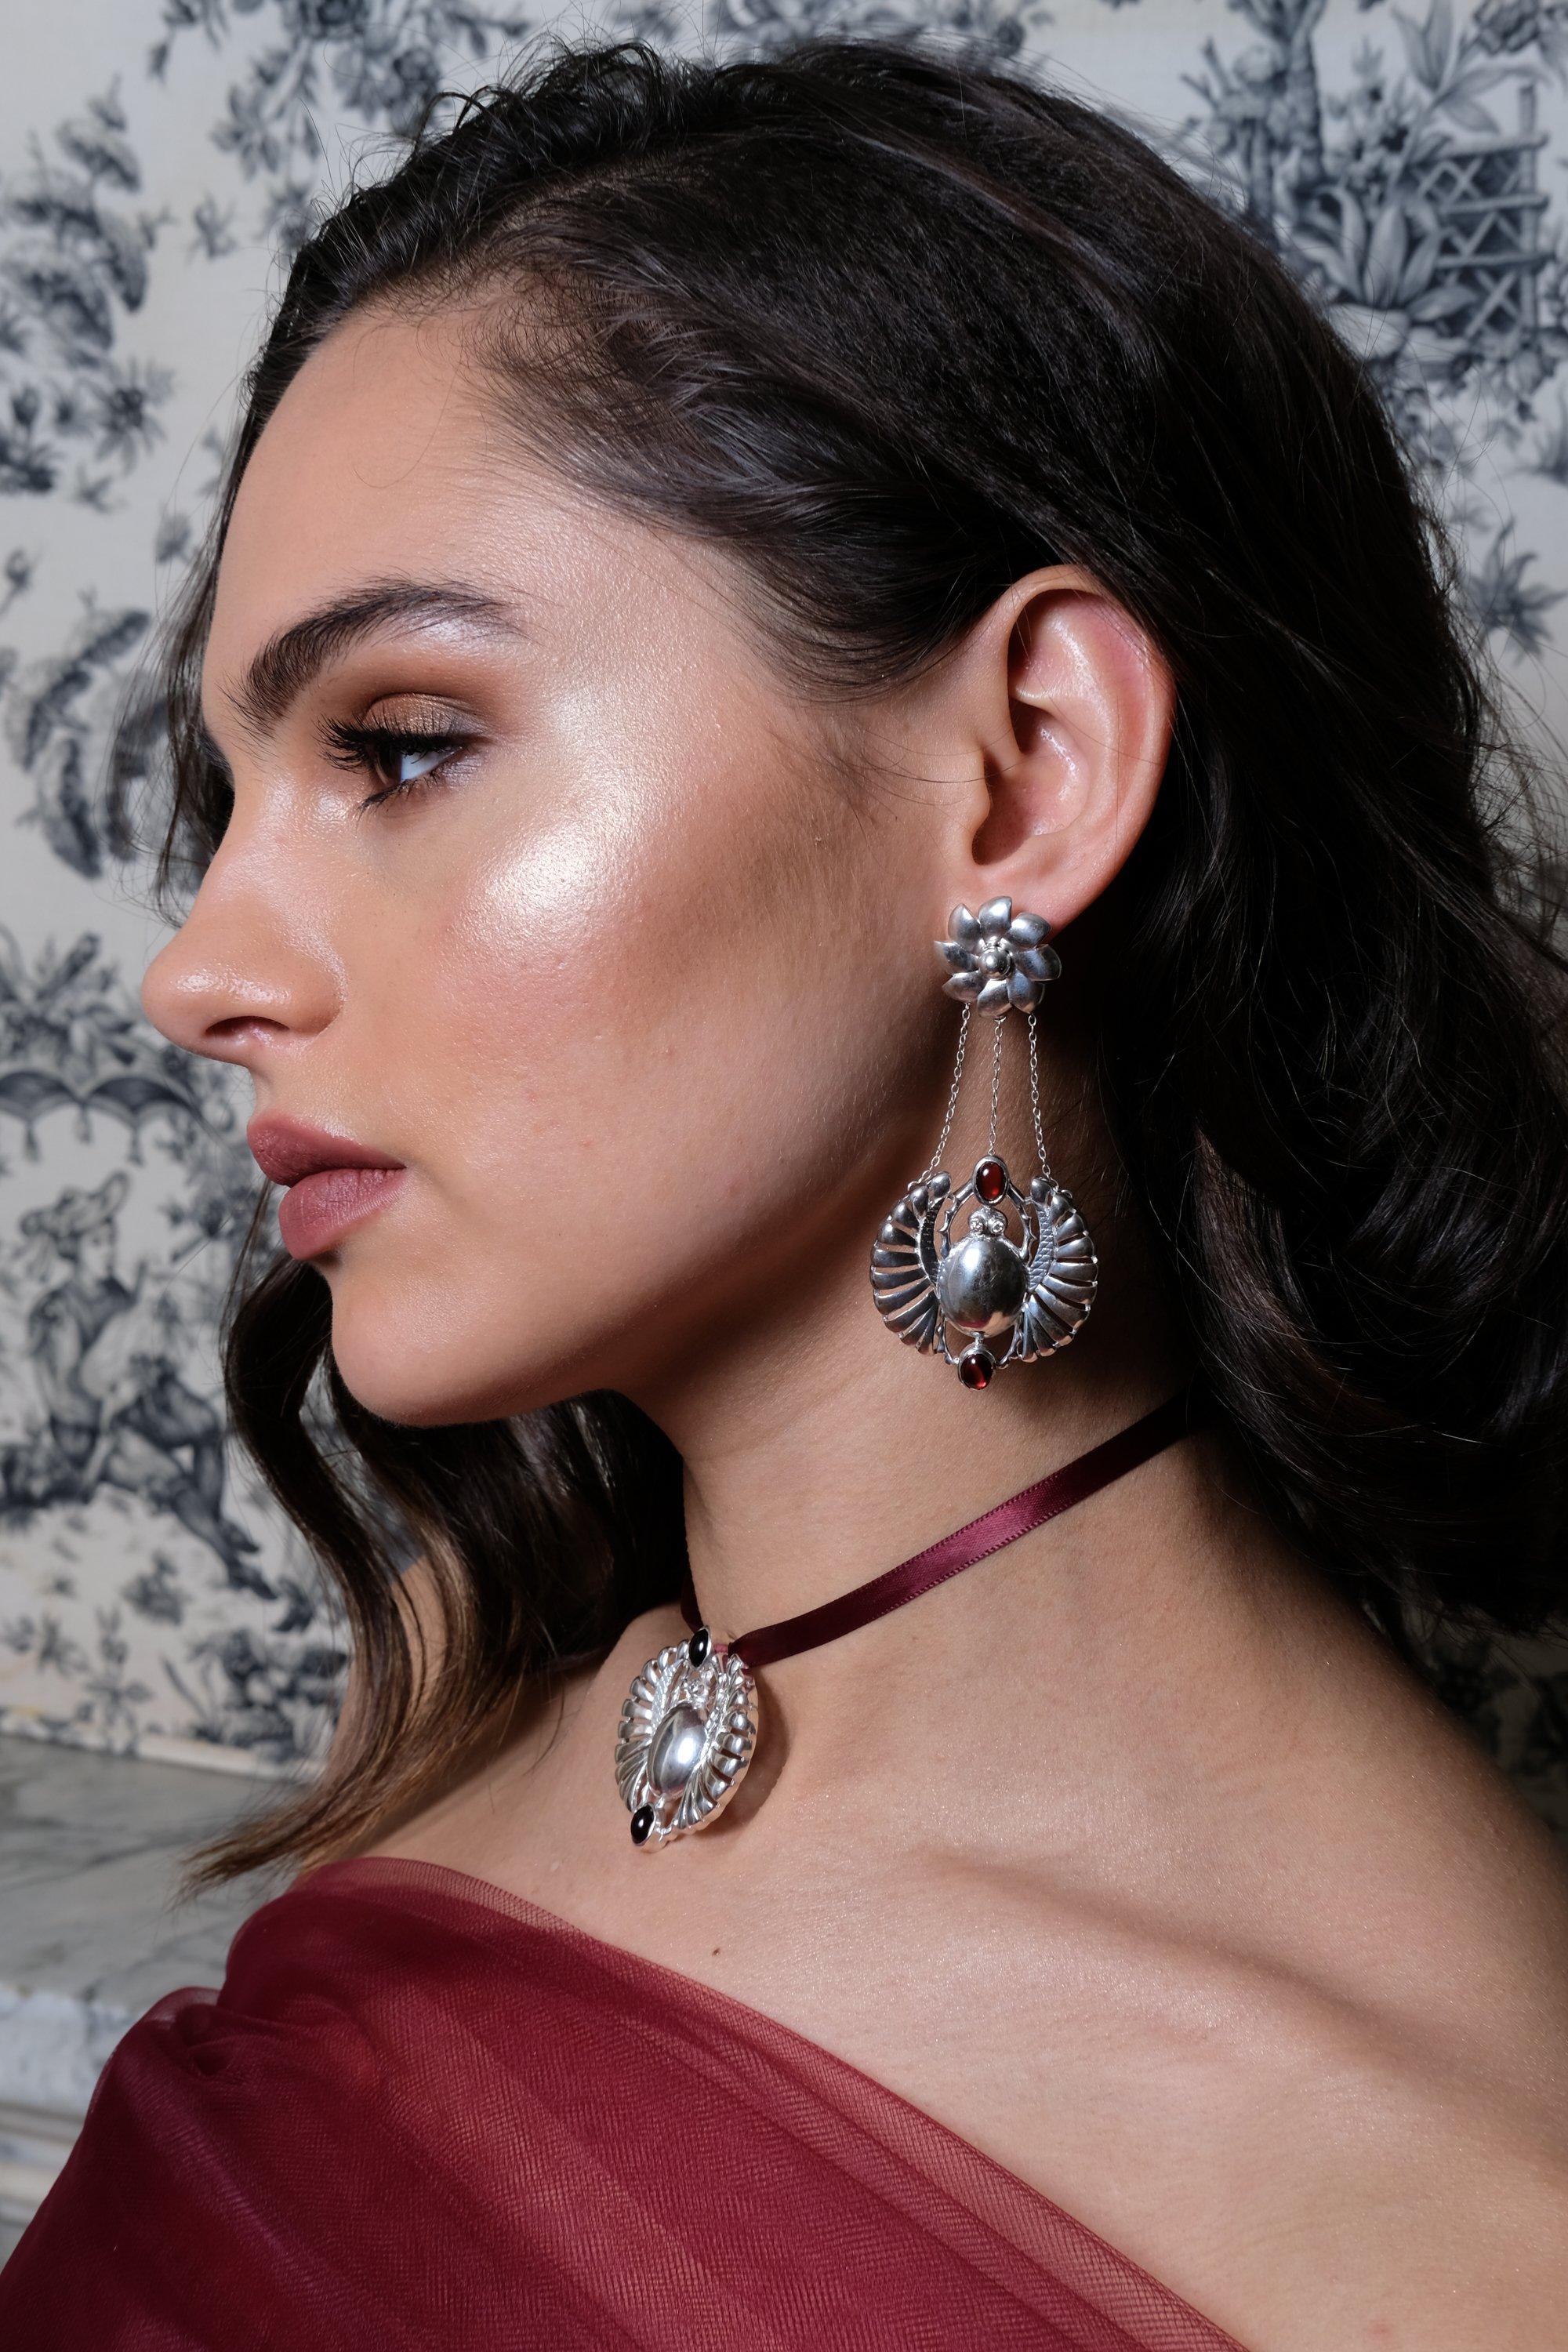 This pair of open winged scarab earrings are the sure way to make a statement to spark a cultural conversation. 18K Gold plated brass or Sterling silver. Gemstones: Cabernet Red Garnet, Lemon Citrine, chocolate diamond eyes.
Post earrings with broad